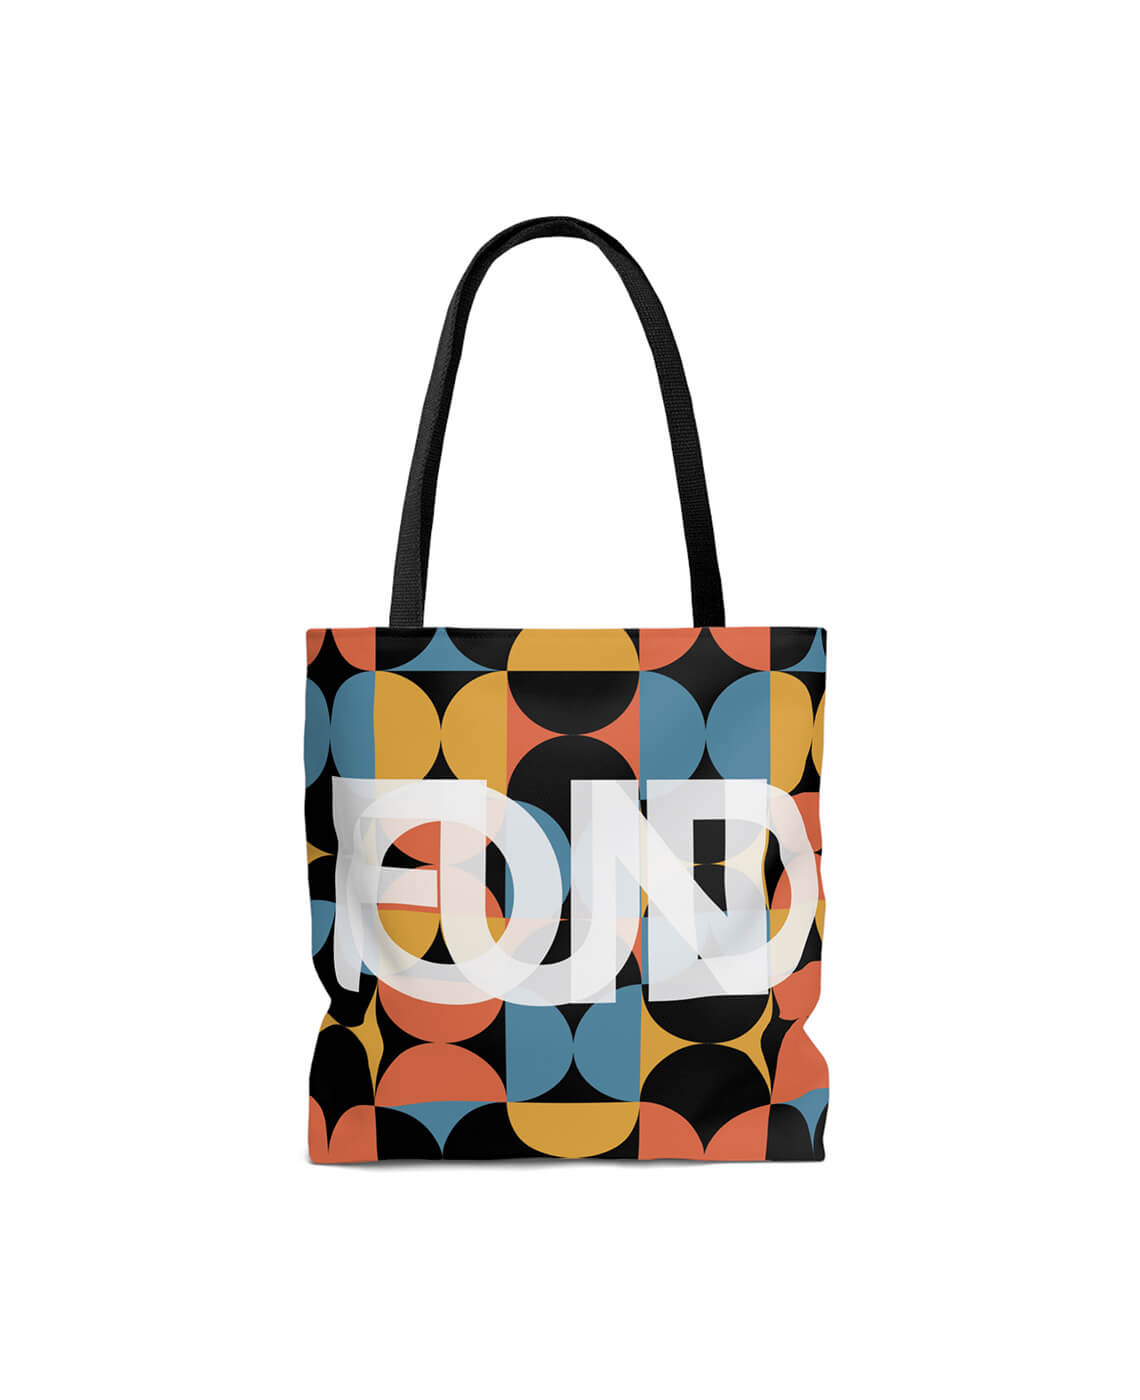 lost and found unisex tote bag one7 store 2